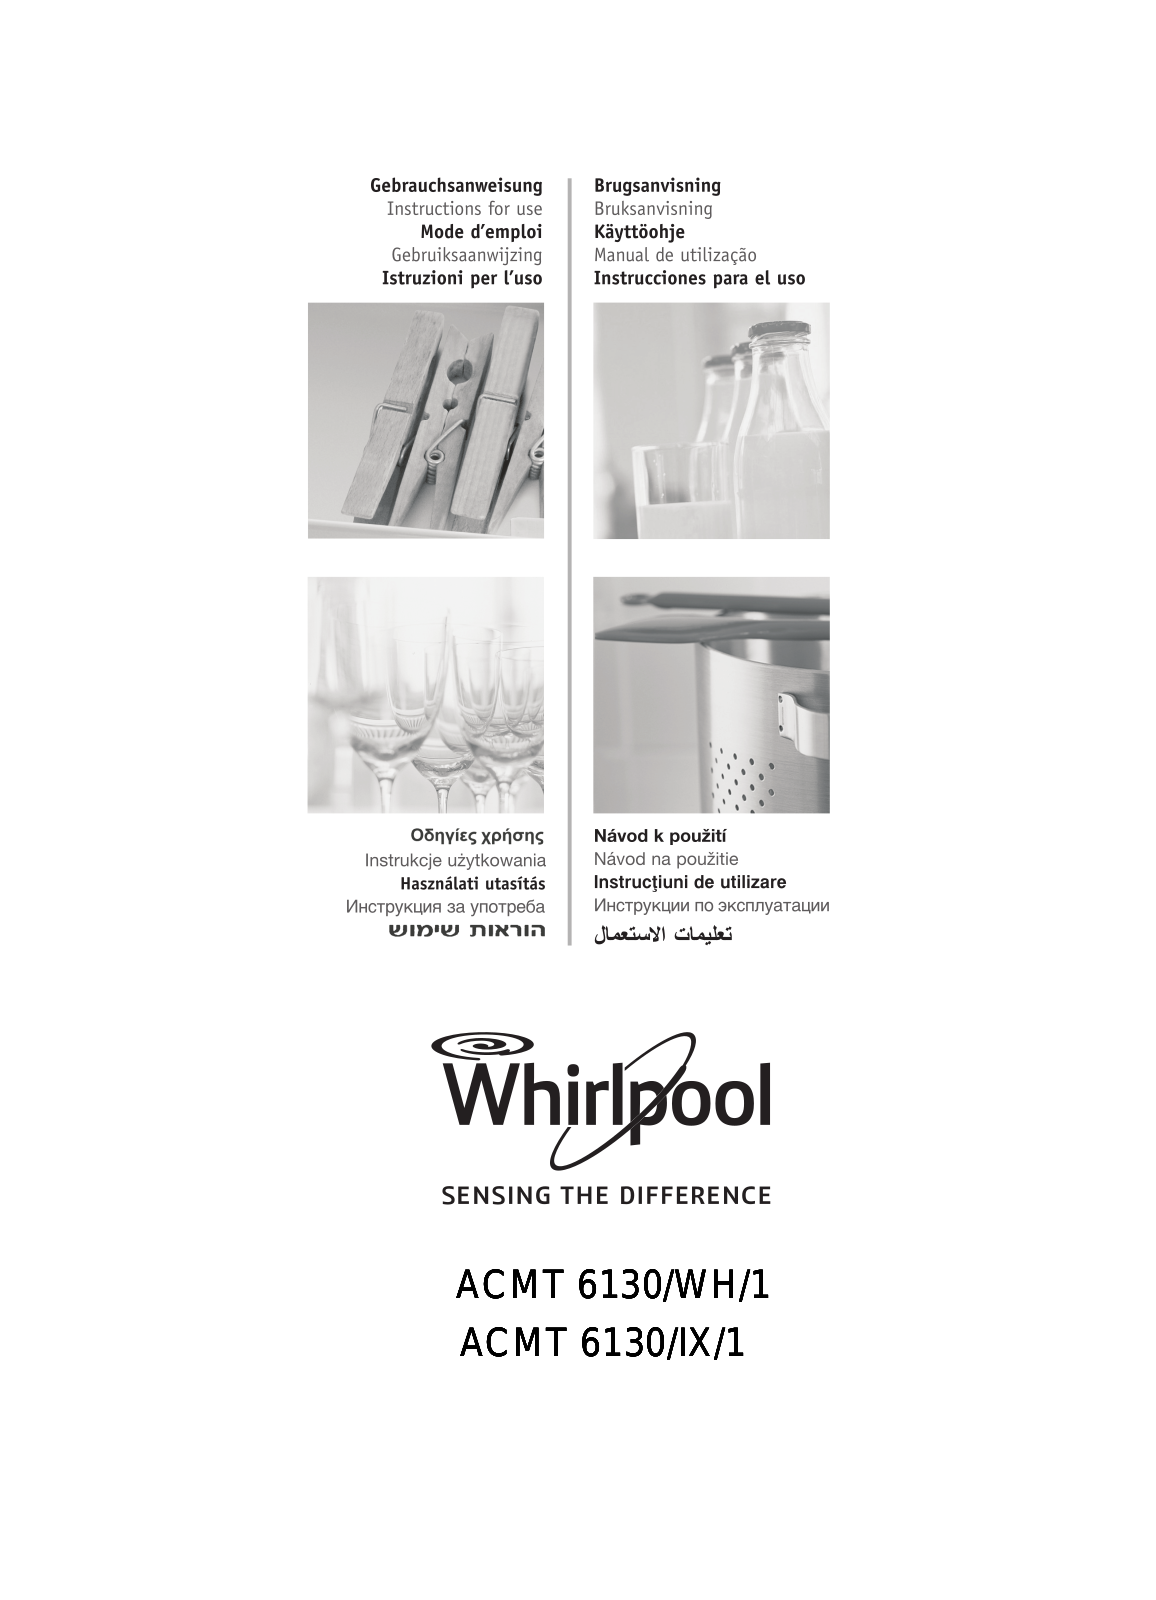 WHIRLPOOL ACMT 6130/WH/1 User Manual